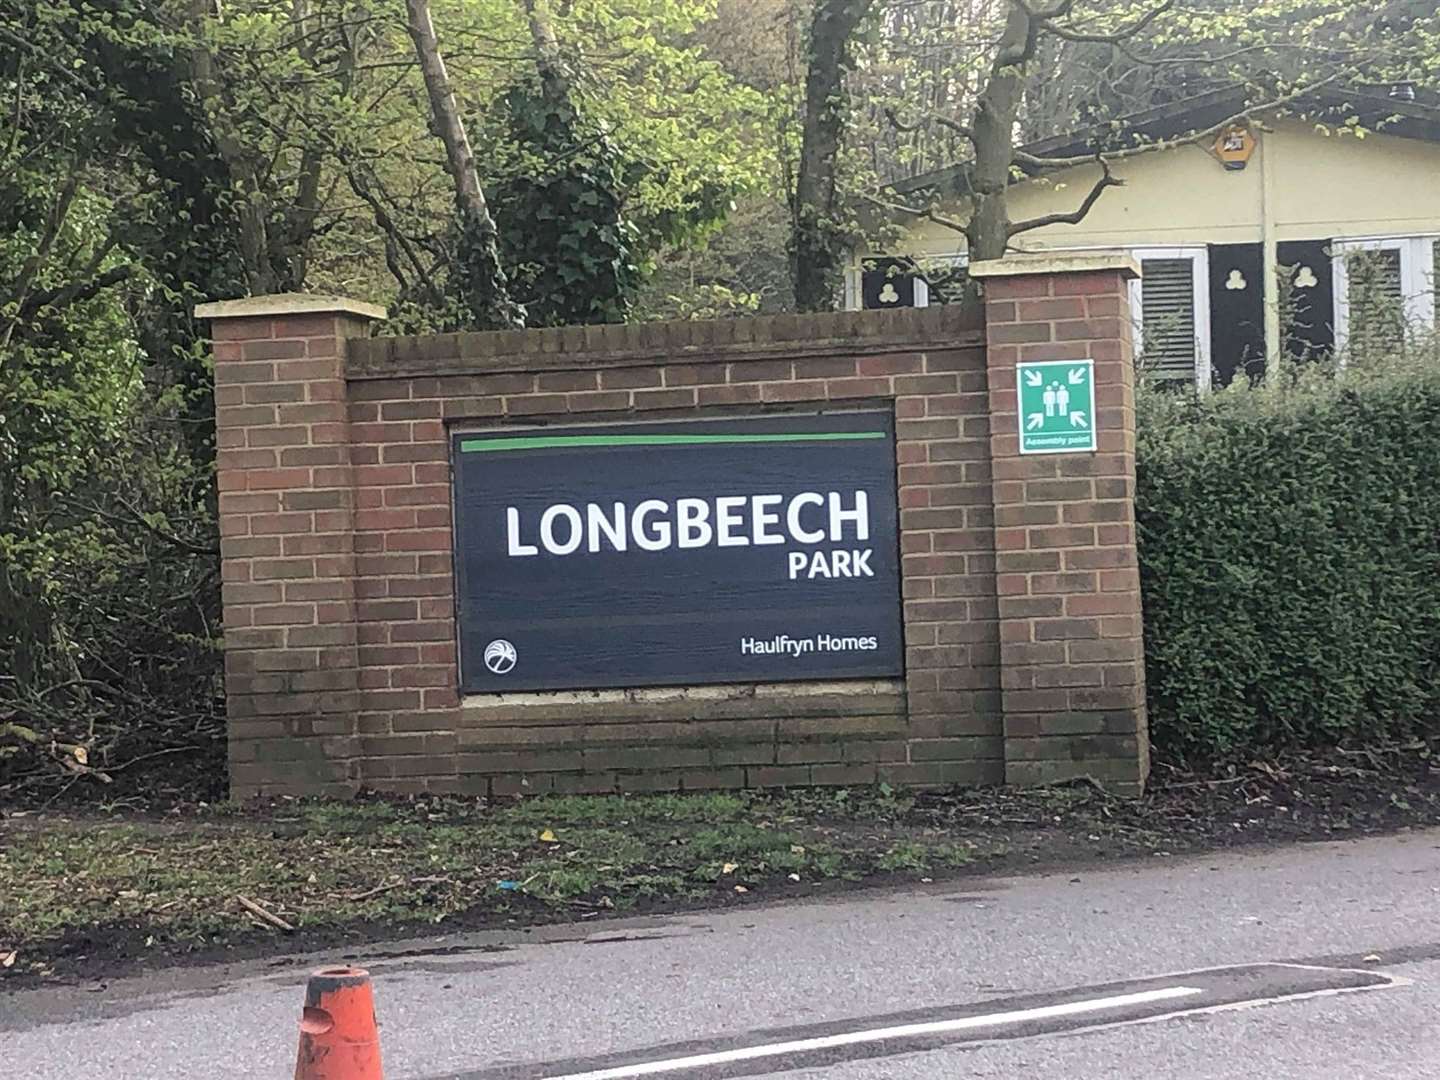 The entrance to Longbeech Park, Charing